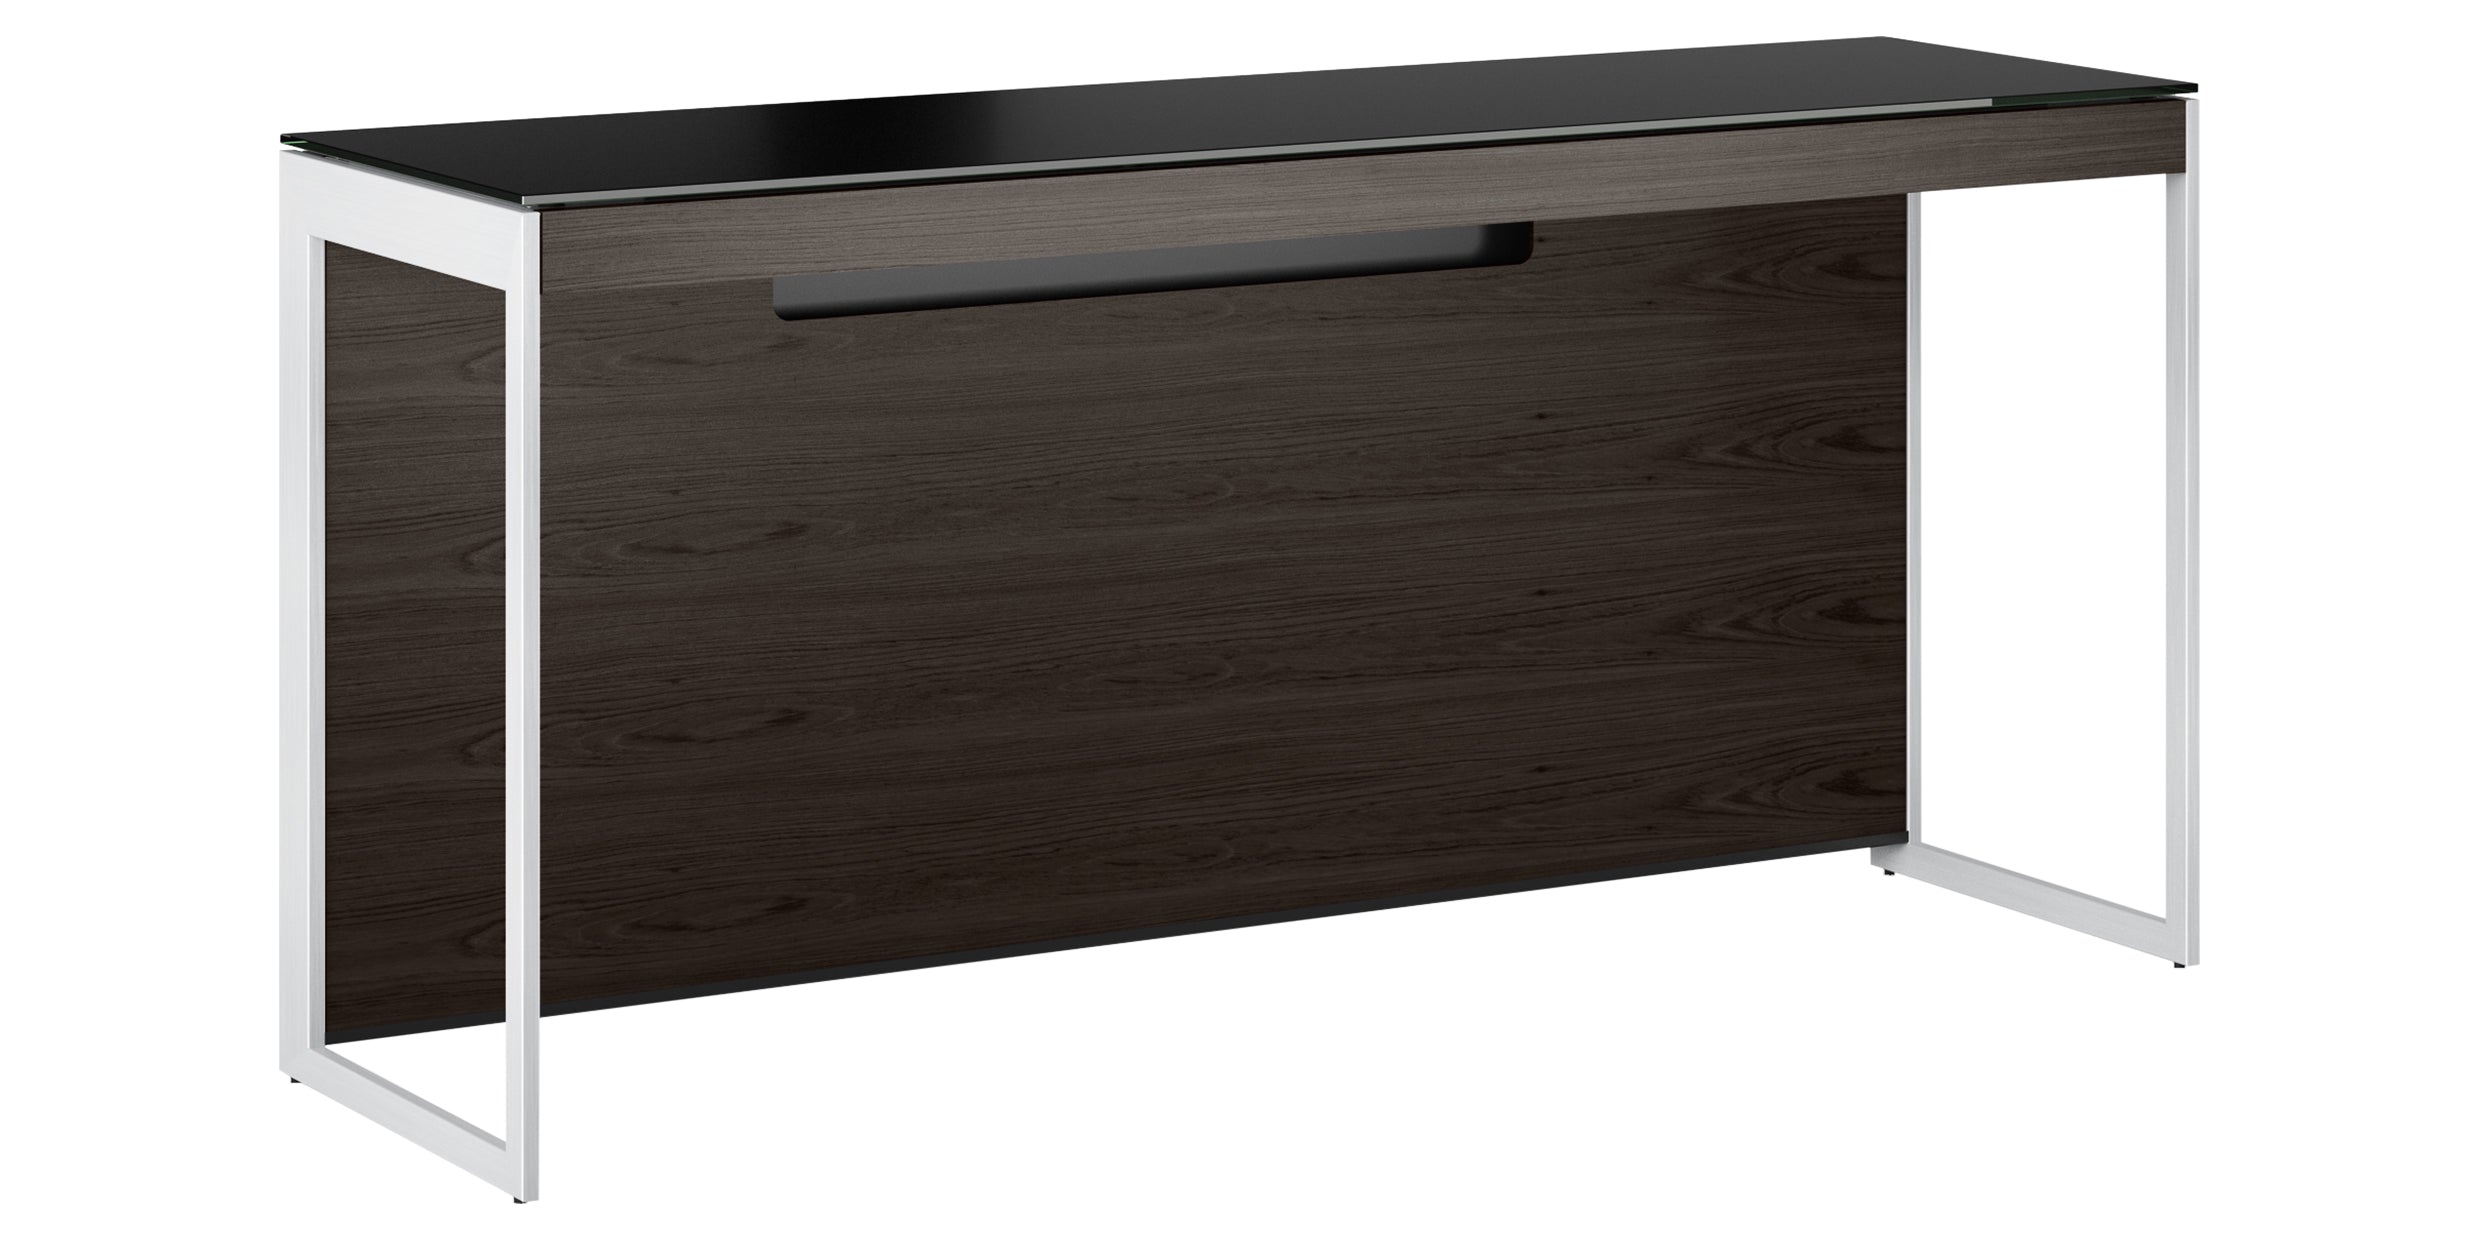 Charcoal Ash Veneer and Black Satin-Etched Glass with Satin Nickel Steel | BDI Sequel Laptop Desk | Valley Ridge Furniture